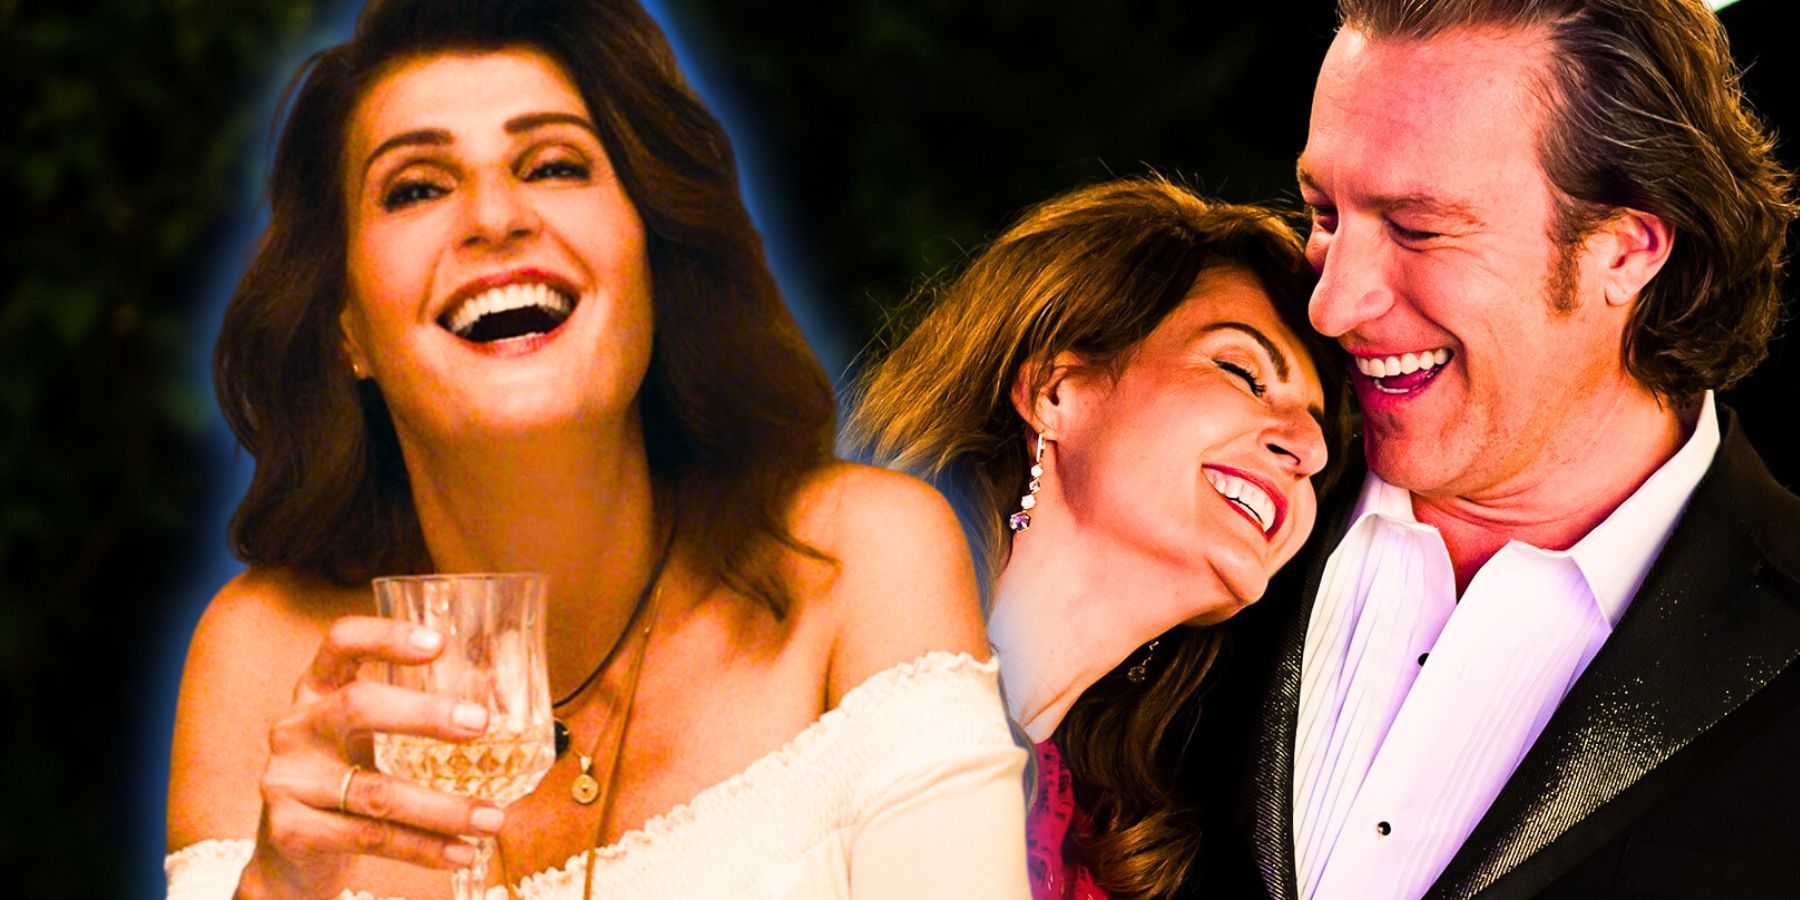 Nia Vardalos in My Big Fat Greek Wedding 3 with background of Toula and Ian in MBFGW2